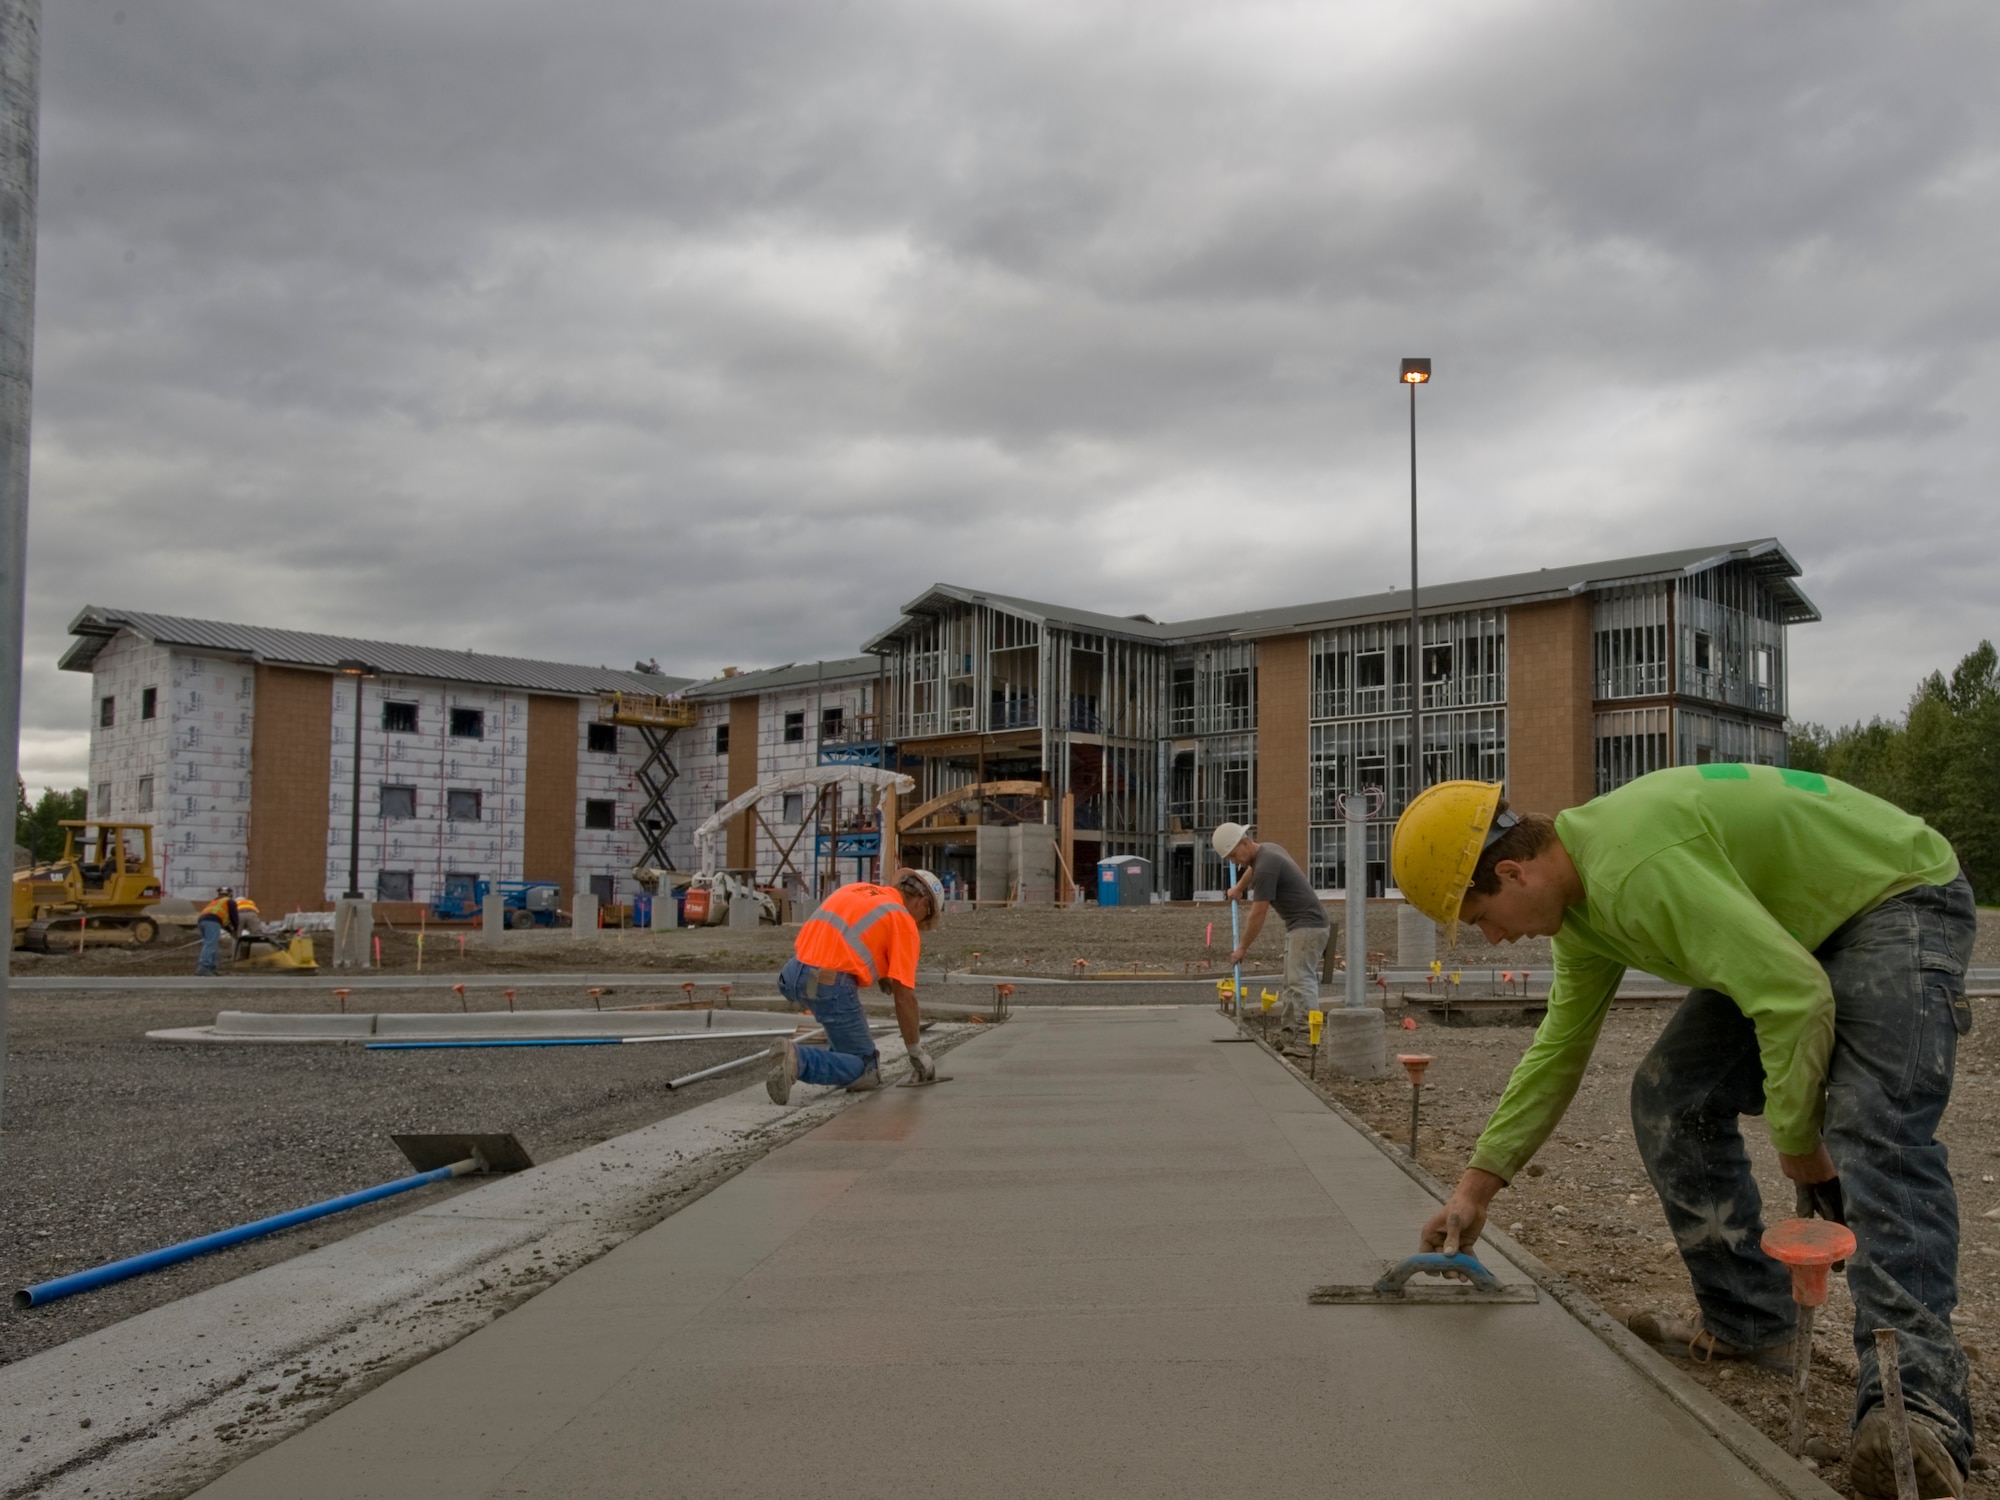 ELMENDORF AIR FORCE BASE, Alaska -- Shannon Simpson and fellow members from Finishing Edge Concrete and Construction, smooth out freshly layed concrete for a sidewalk here Sept. 2. The sidewalk is being constructed alongside the new parking lot for the brand new Airman dorm. The dorm is scheduled to be fully operational by mid-Febuary. (U.S. Air Force photo/Staff Sgt. Joshua Garcia)